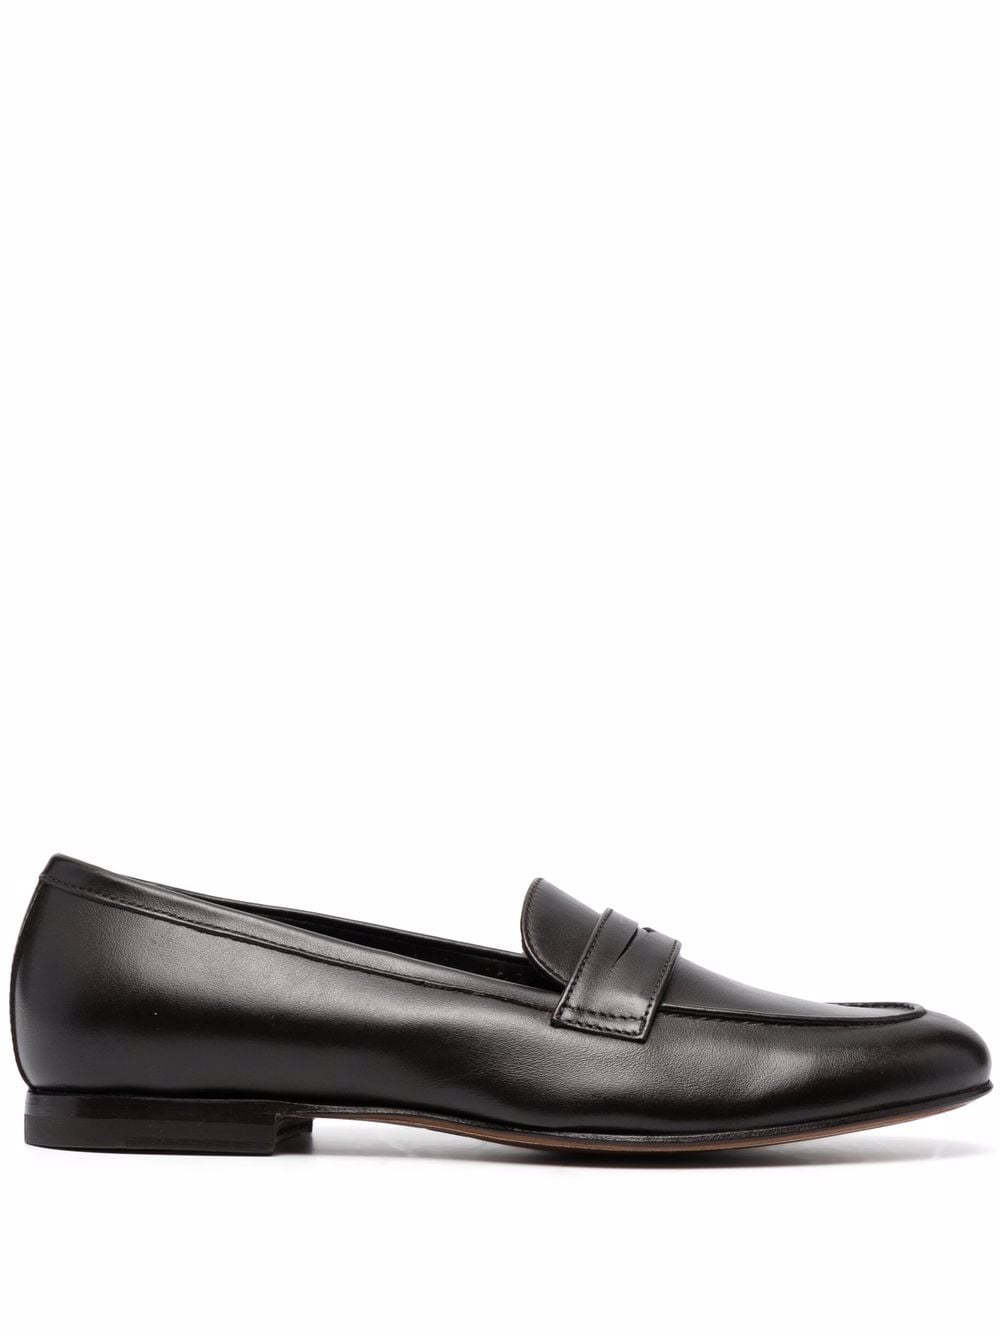 Scarosso Valeria leather penny loafers - Brown von Scarosso